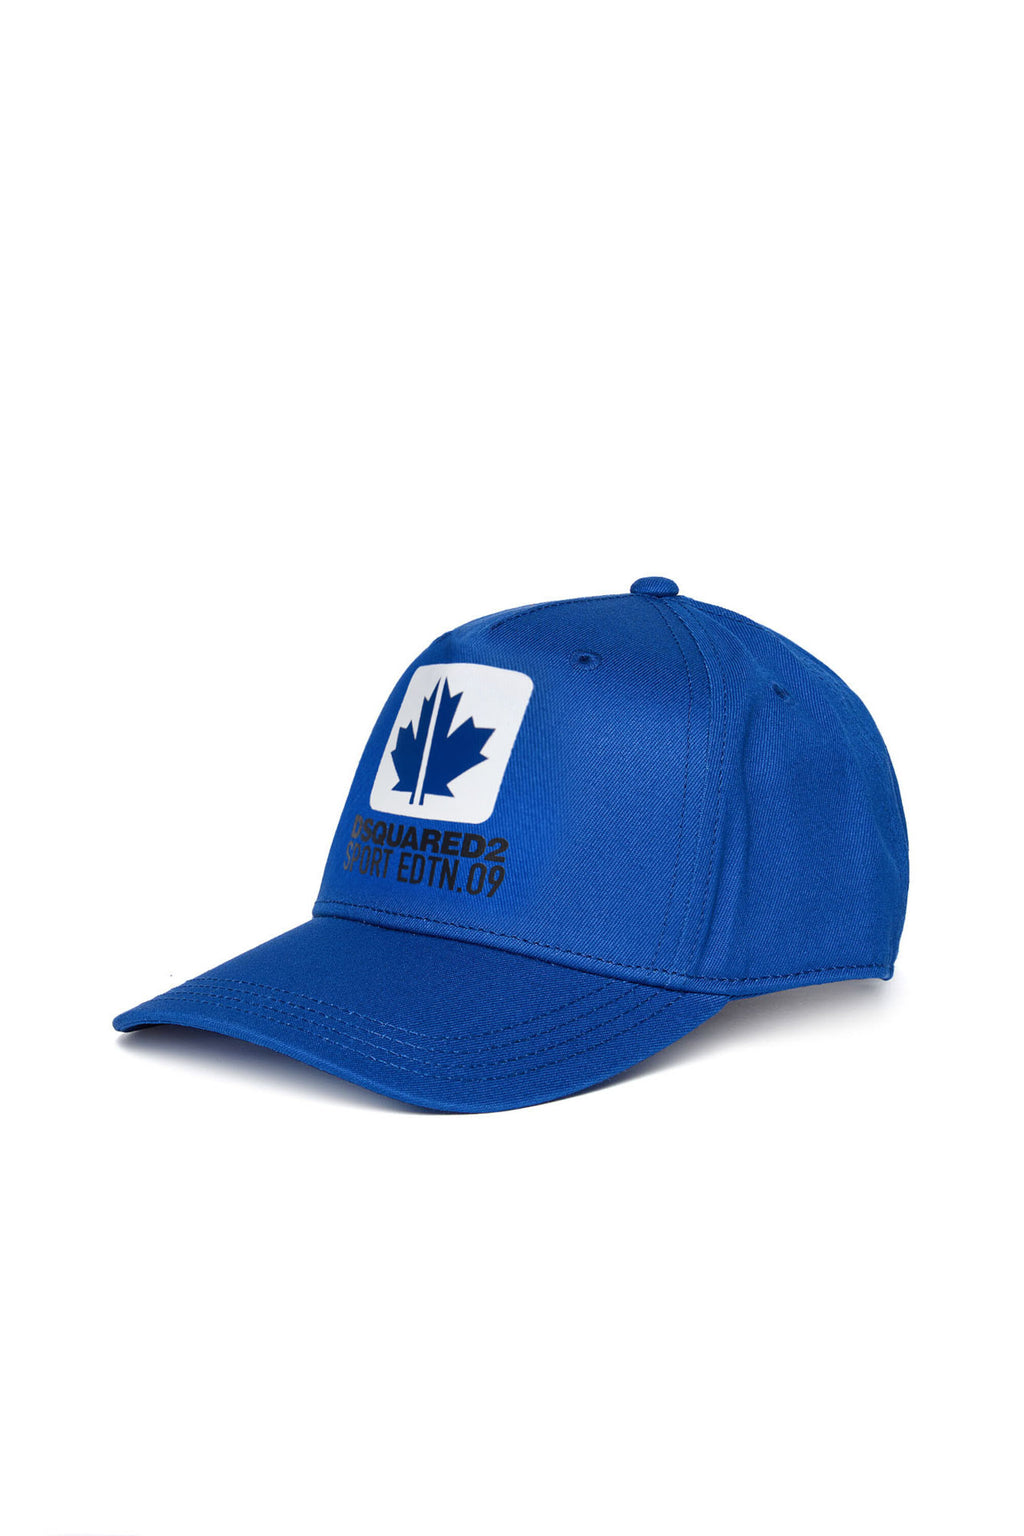 Baseball cap with Leaf graphics